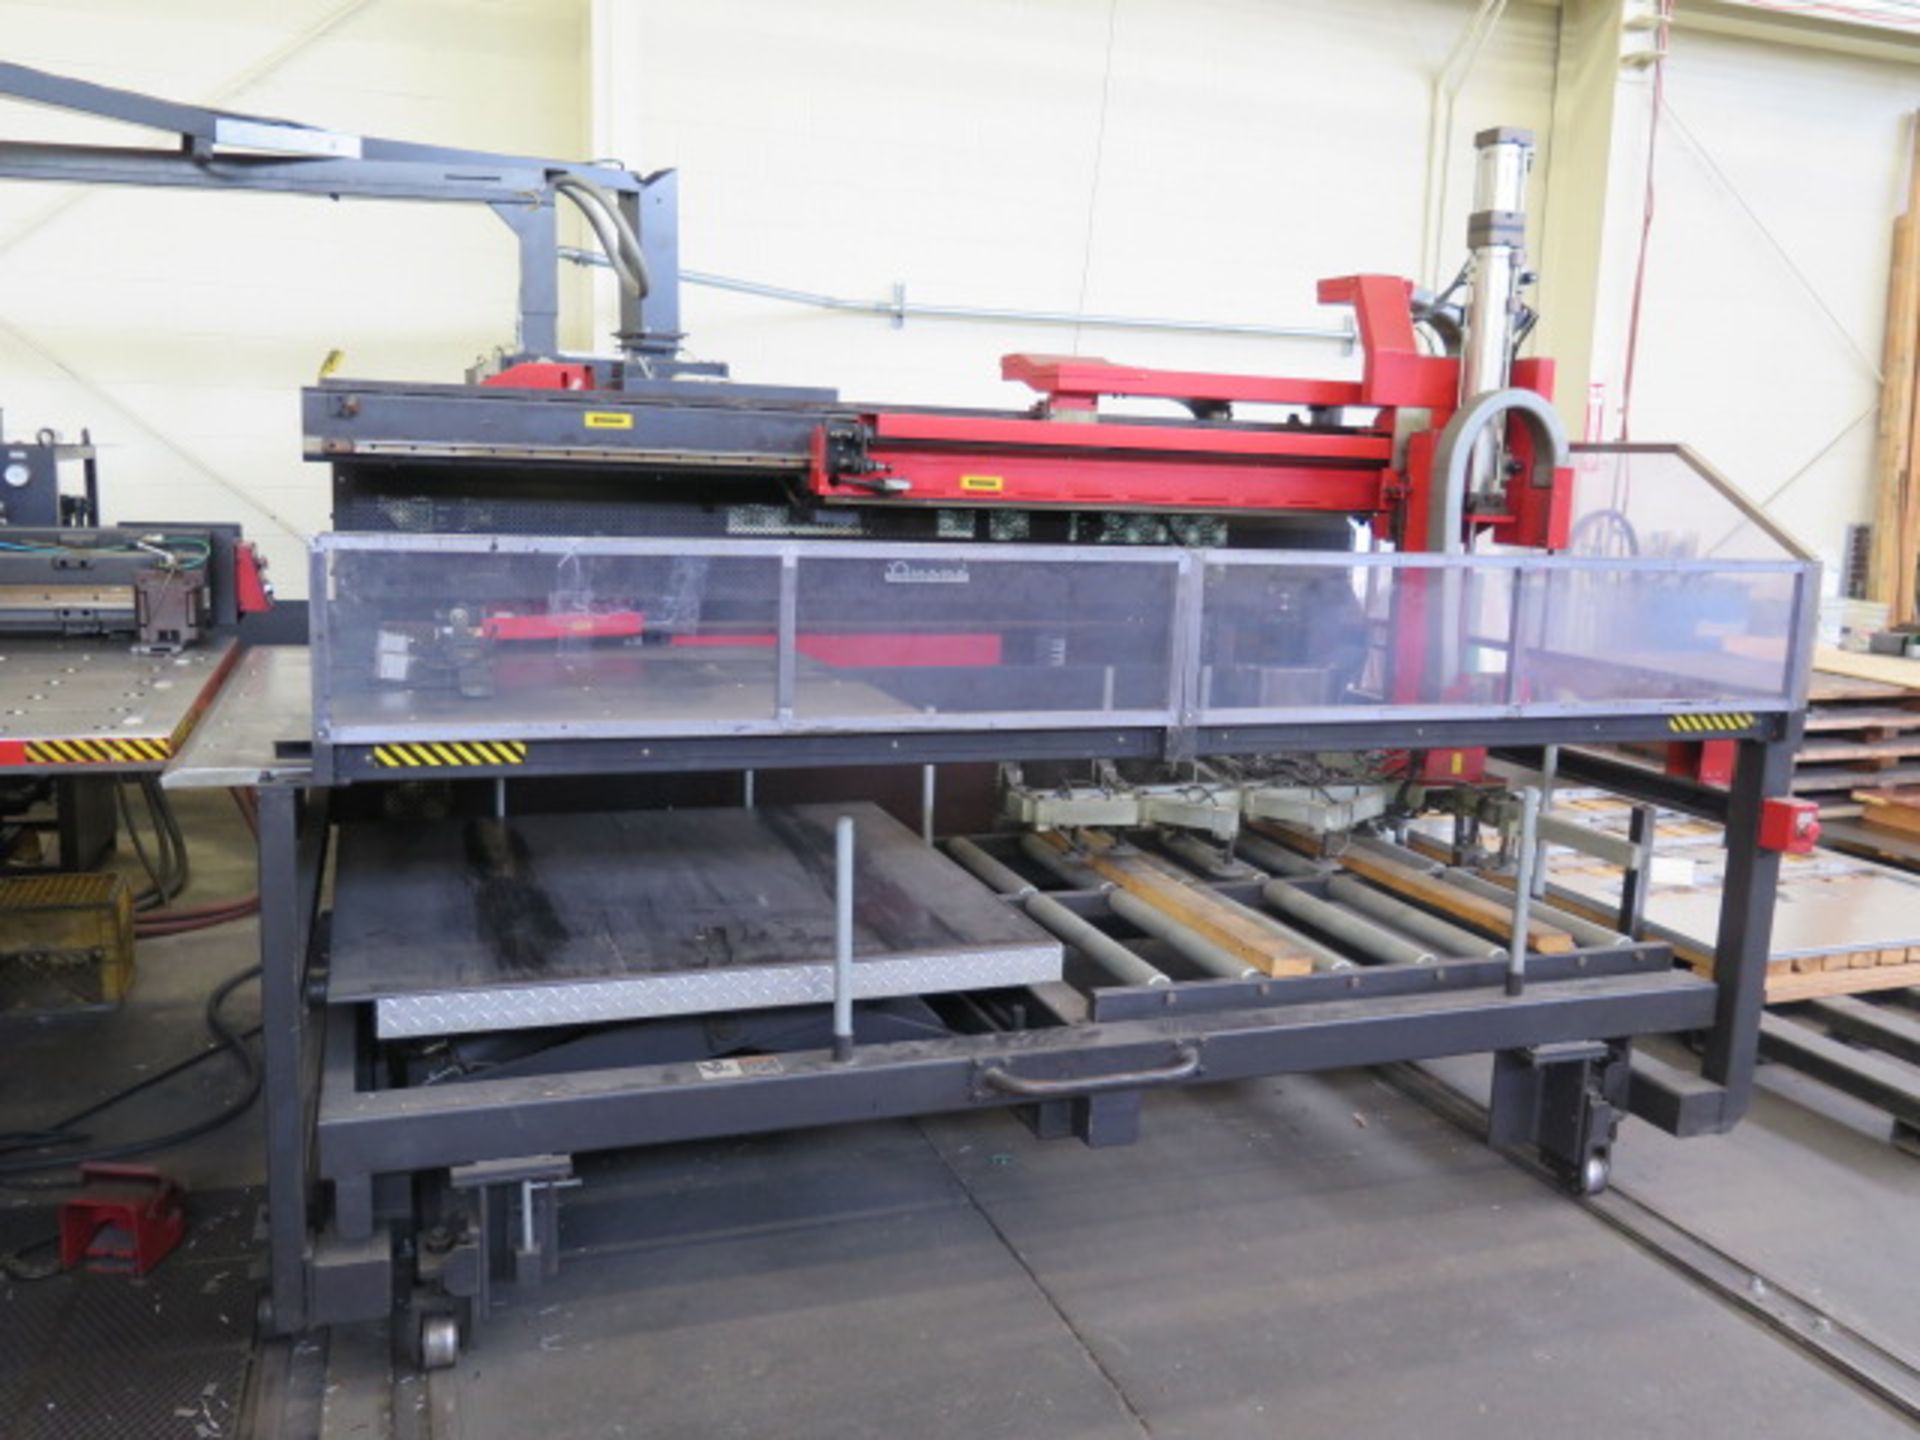 Amada VIPROS 345 30-Ton CNC Turret Punch Cell s/n 34510153 w/ 04P-C Controls, 58-Station, SOLD AS IS - Image 21 of 28